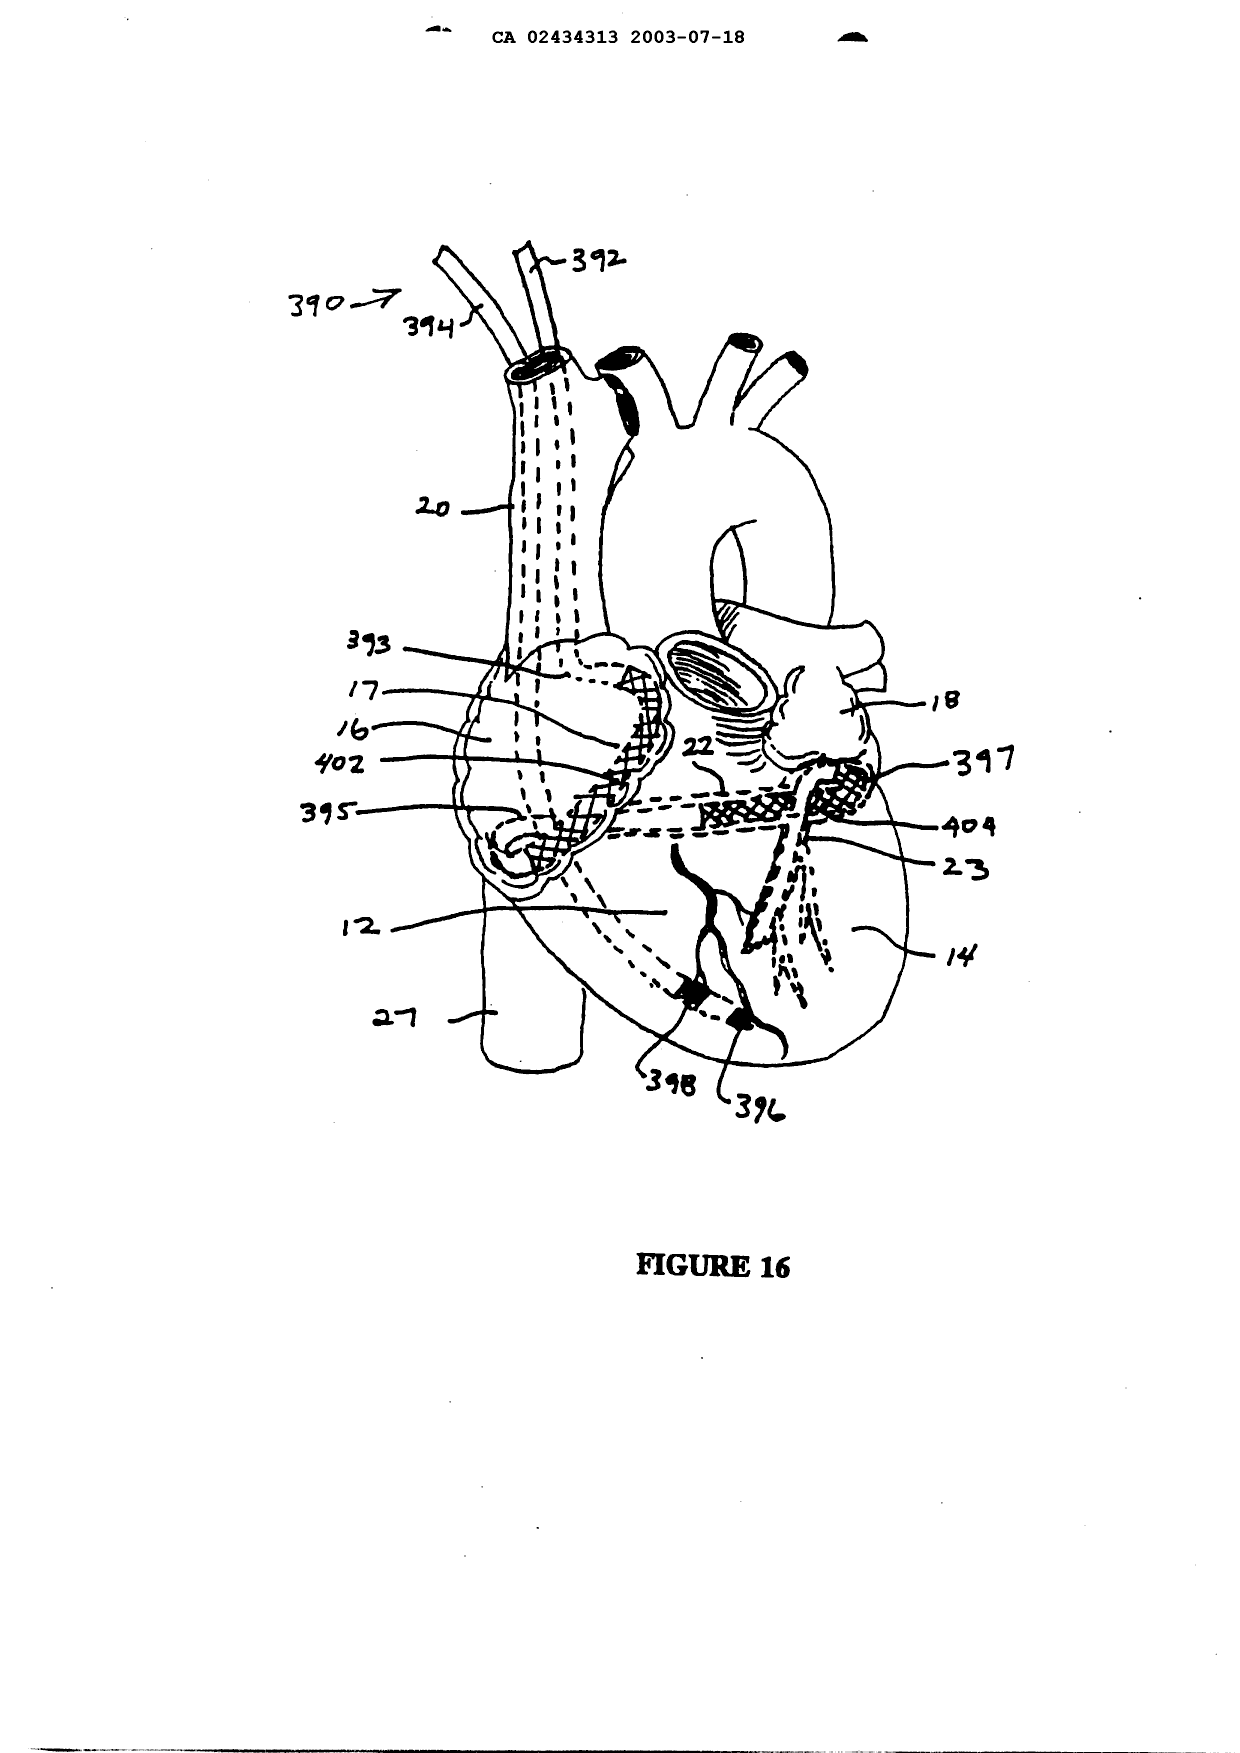 Canadian Patent Document 2434313. Drawings 20030718. Image 15 of 15